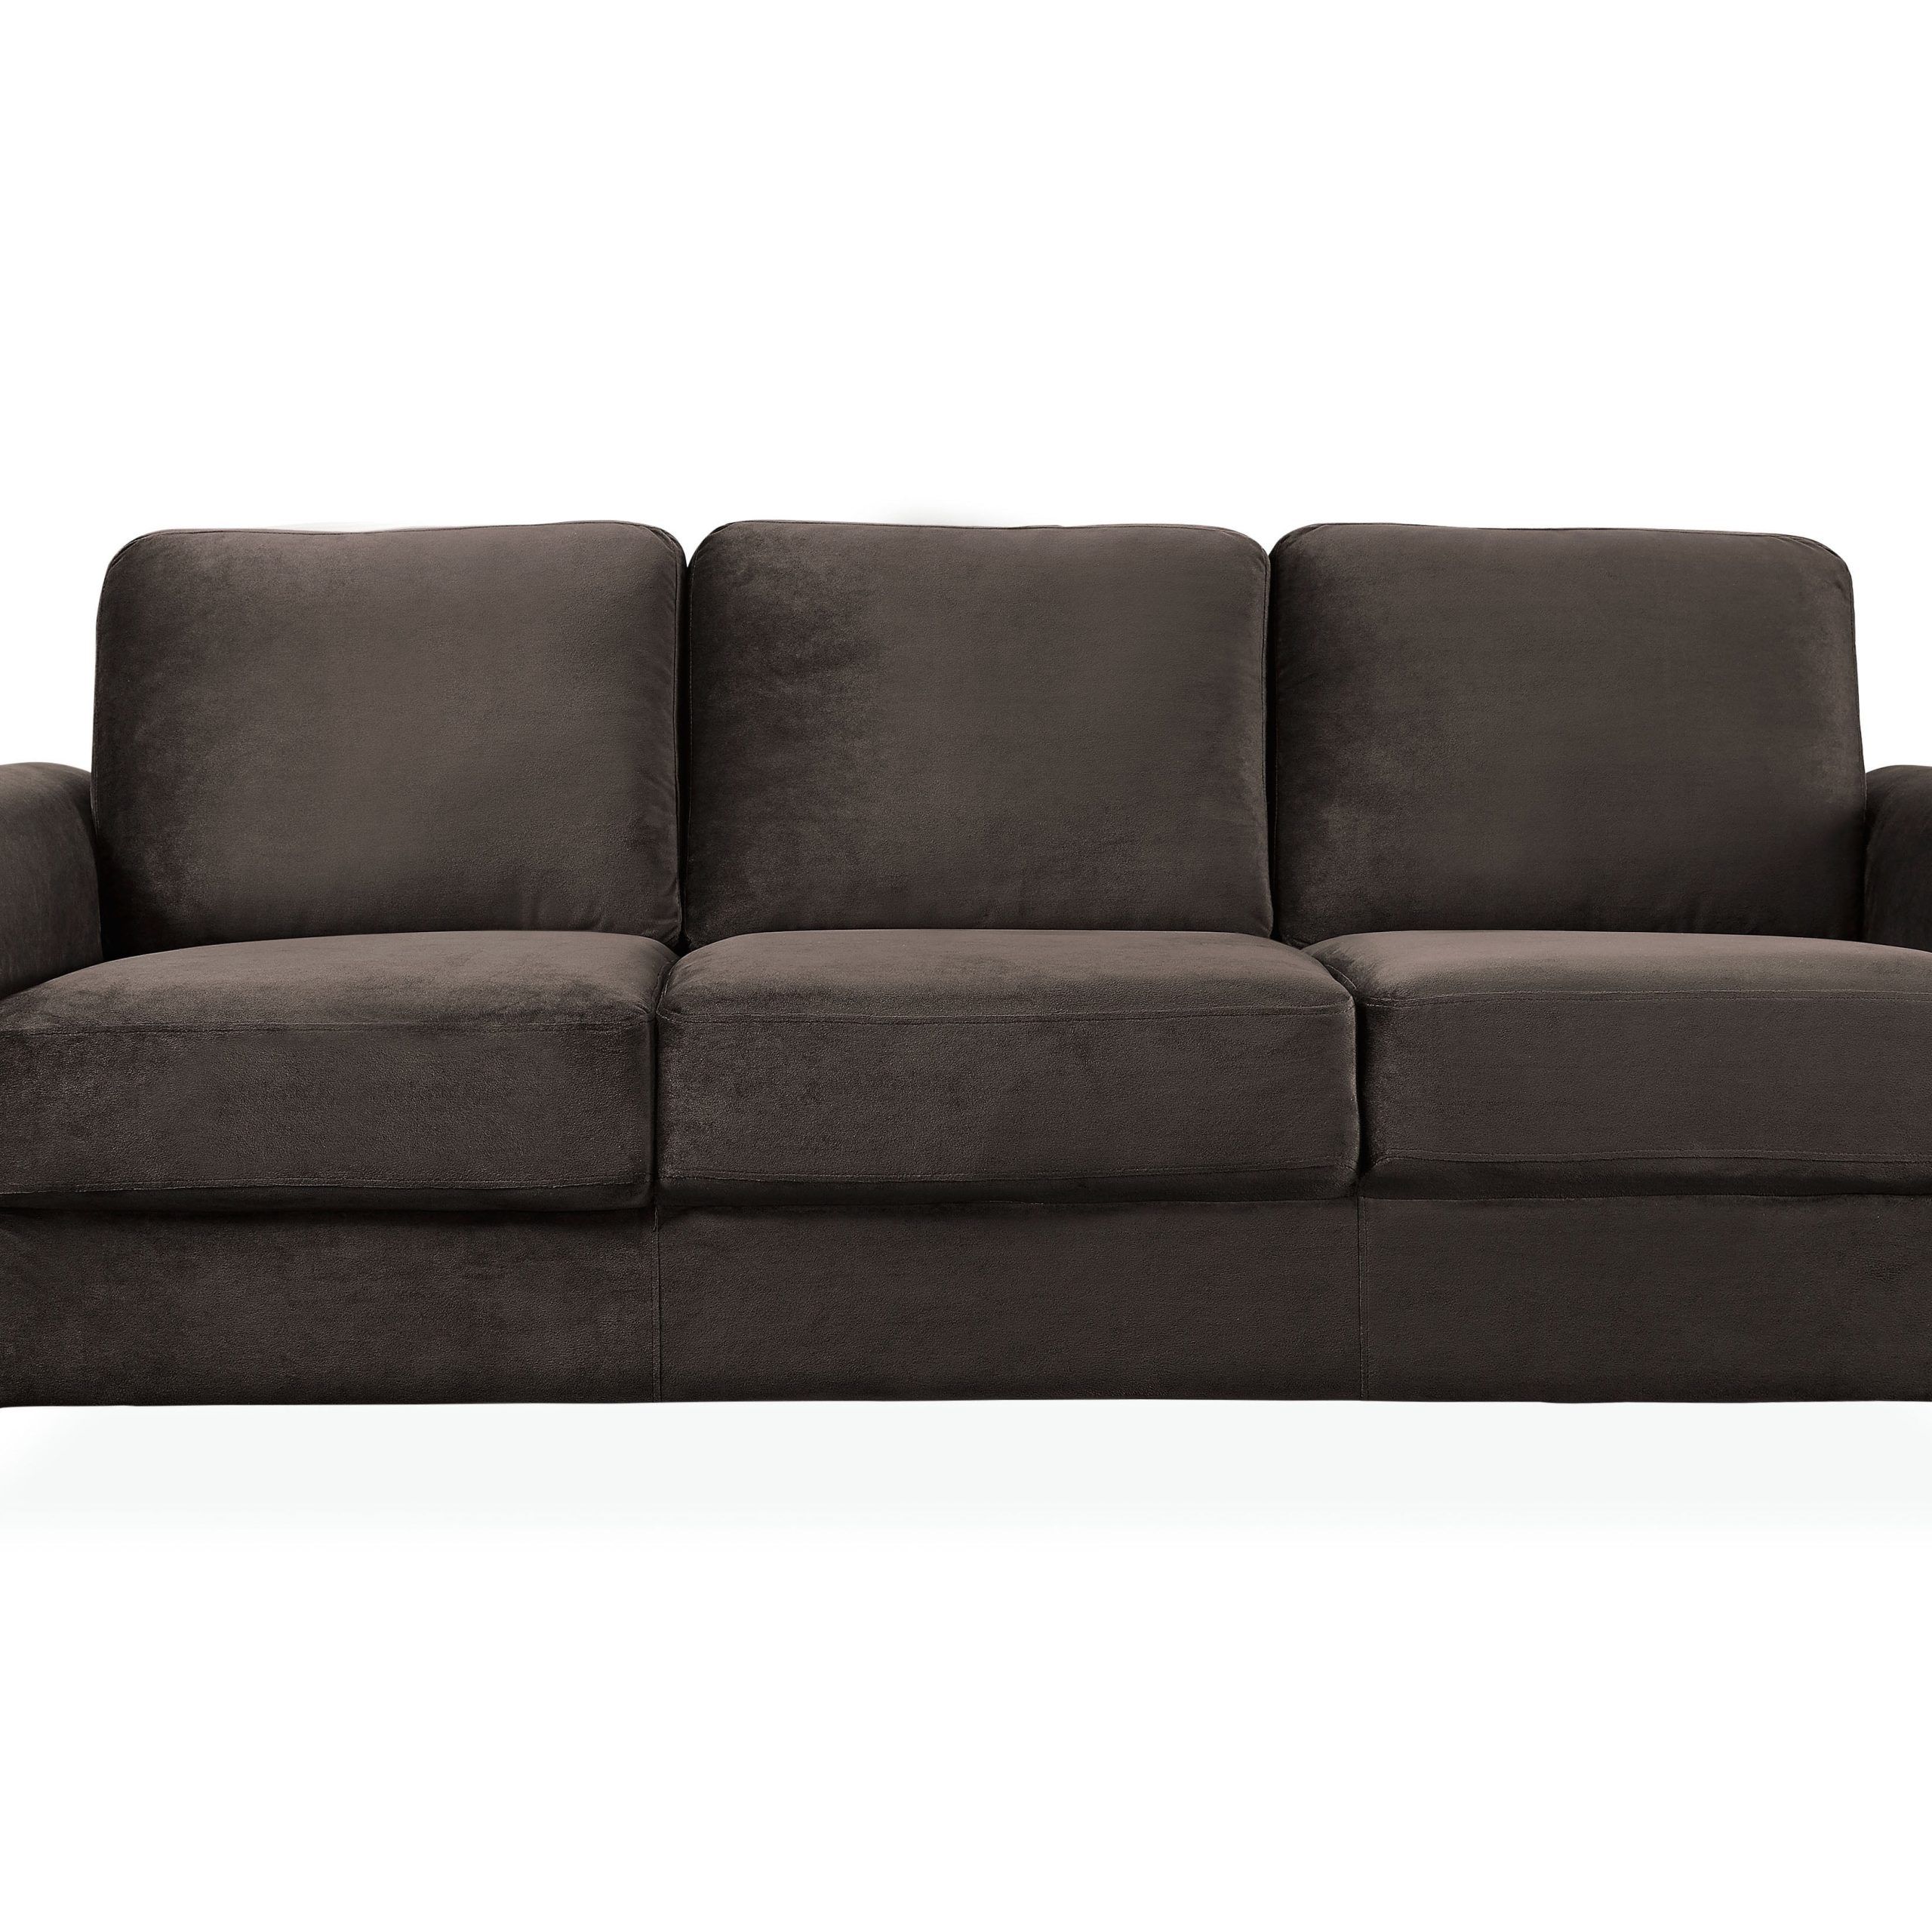 Lifestyle Solutions Taryn Traditional Sofa With Curved Arms, Black Fabric  Upholstery – Walmart Throughout Traditional Black Fabric Sofas (Photo 14 of 15)